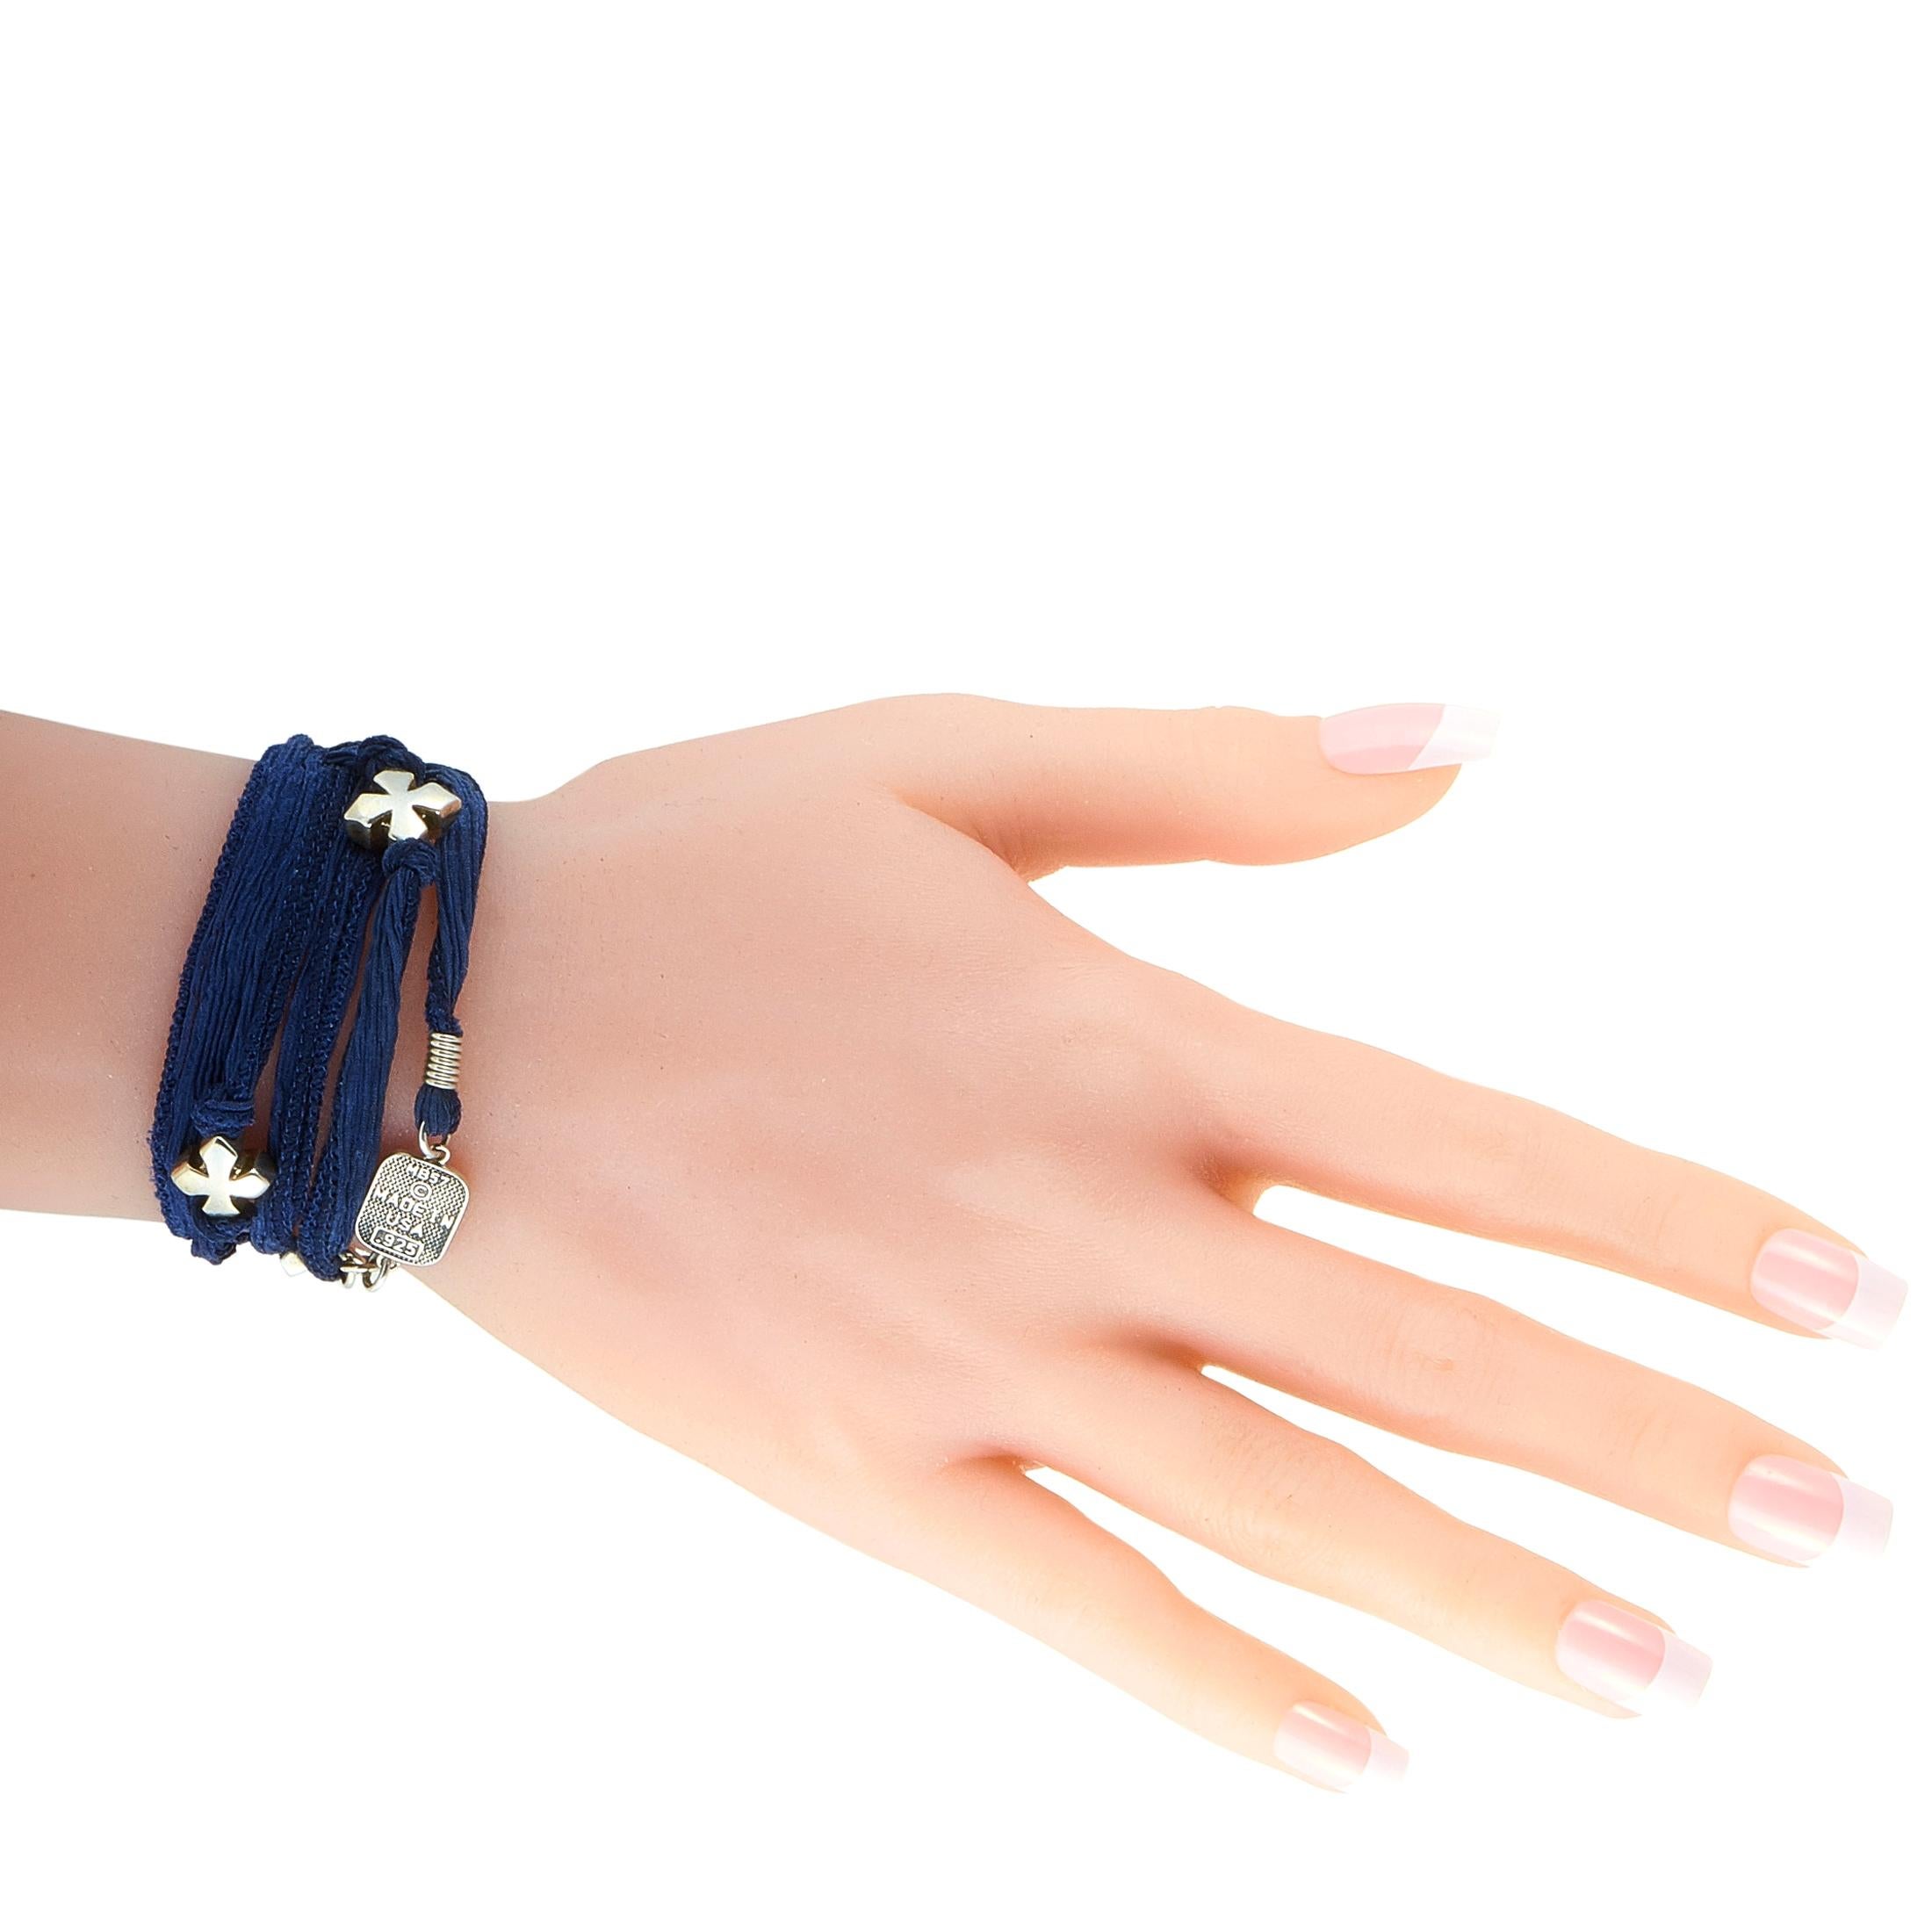 This King Baby bracelet is presented with a 28” indigo silk cord that boasts inserts in sterling silver. The bracelet weighs 17.9 grams.

Offered in brand new condition, this jewelry piece includes the manufacturer’s pouch.